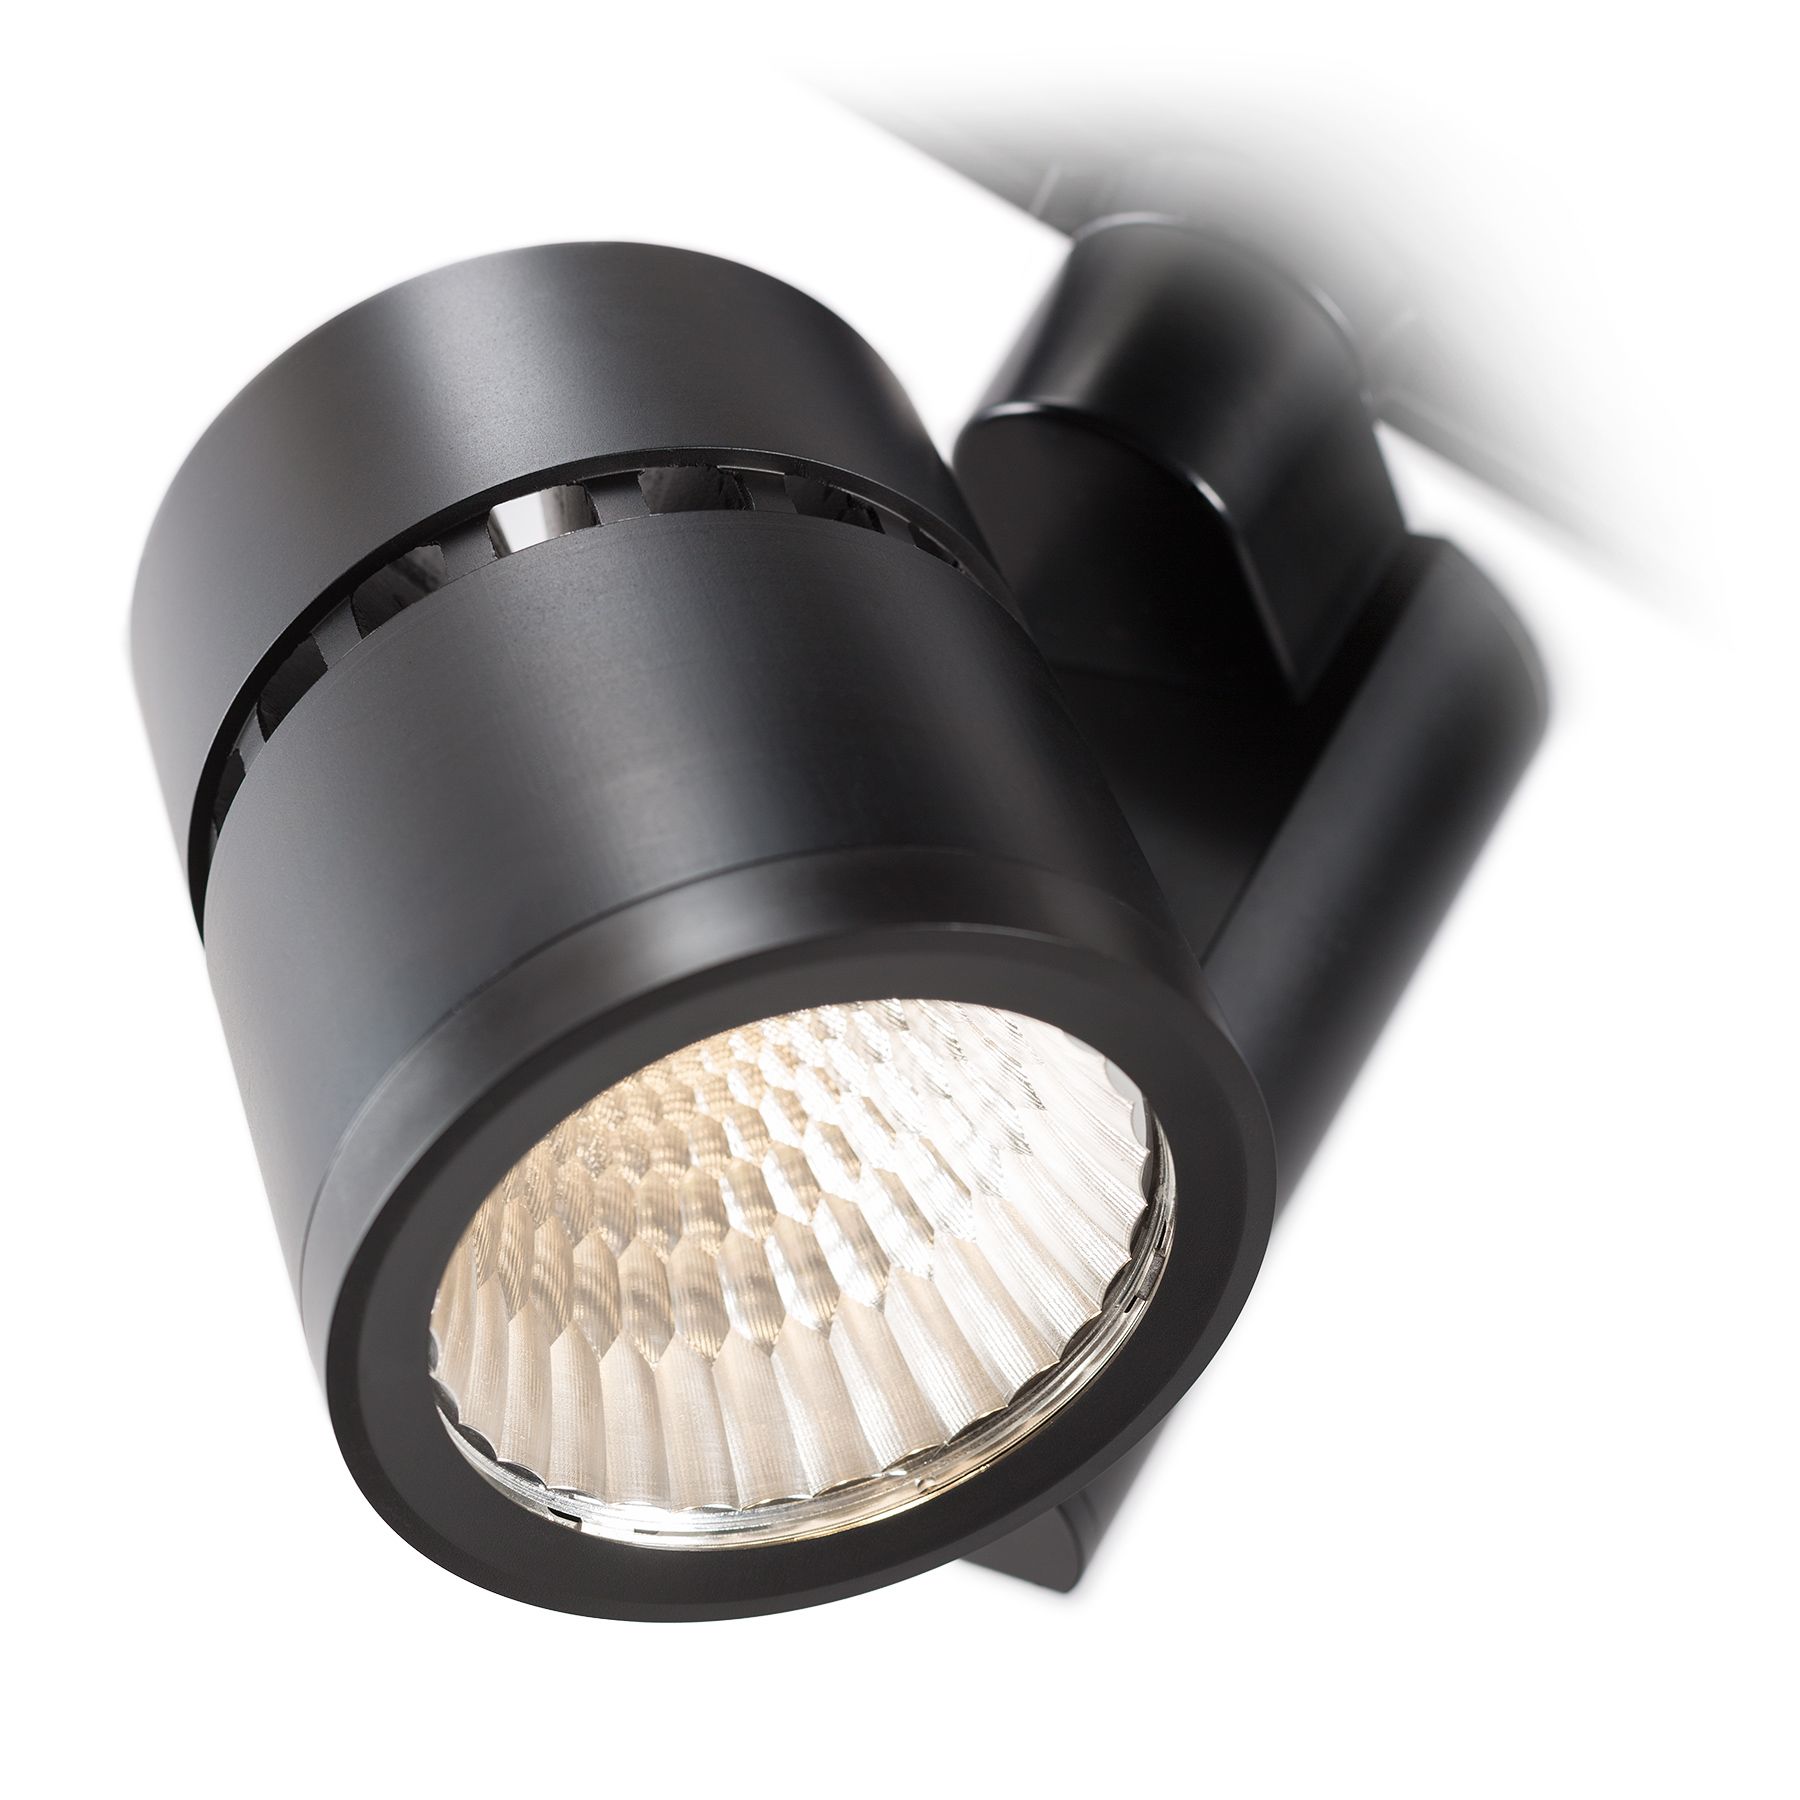 Alcyon LED Vertical Track Heads - Track heads | Lightolier - Signify